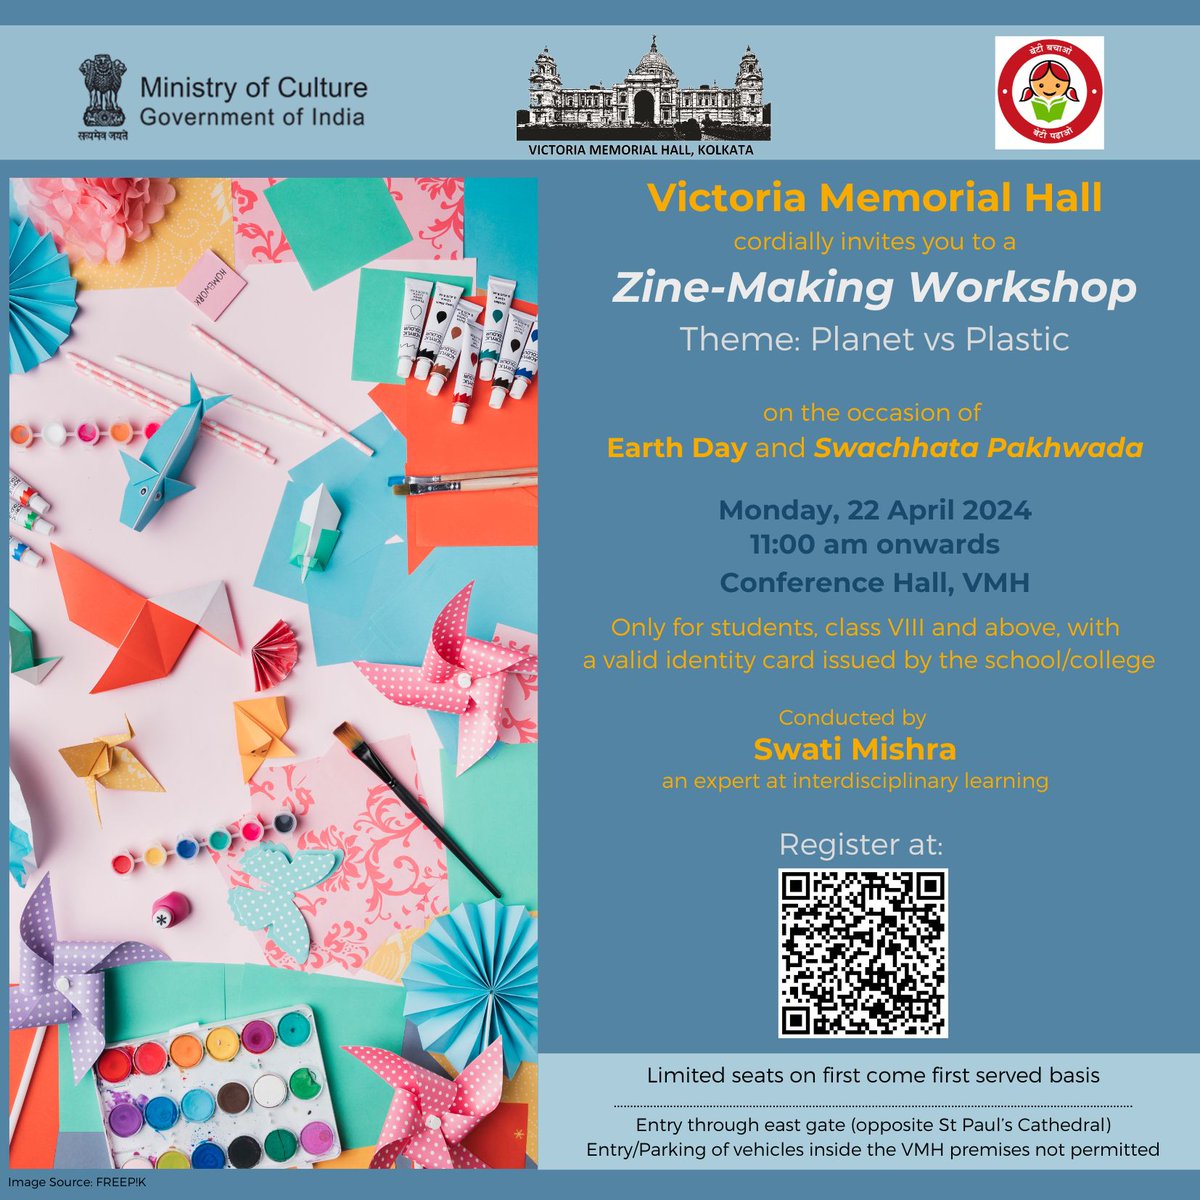 Prior registration is required to participate in this engaging workshop. To register, please click the link or scan the QR code docs.google.com/forms/d/e/1FAI… #vmh #EarthDay2024 #PlanetVsPlastics #ZineMakingWorkshop